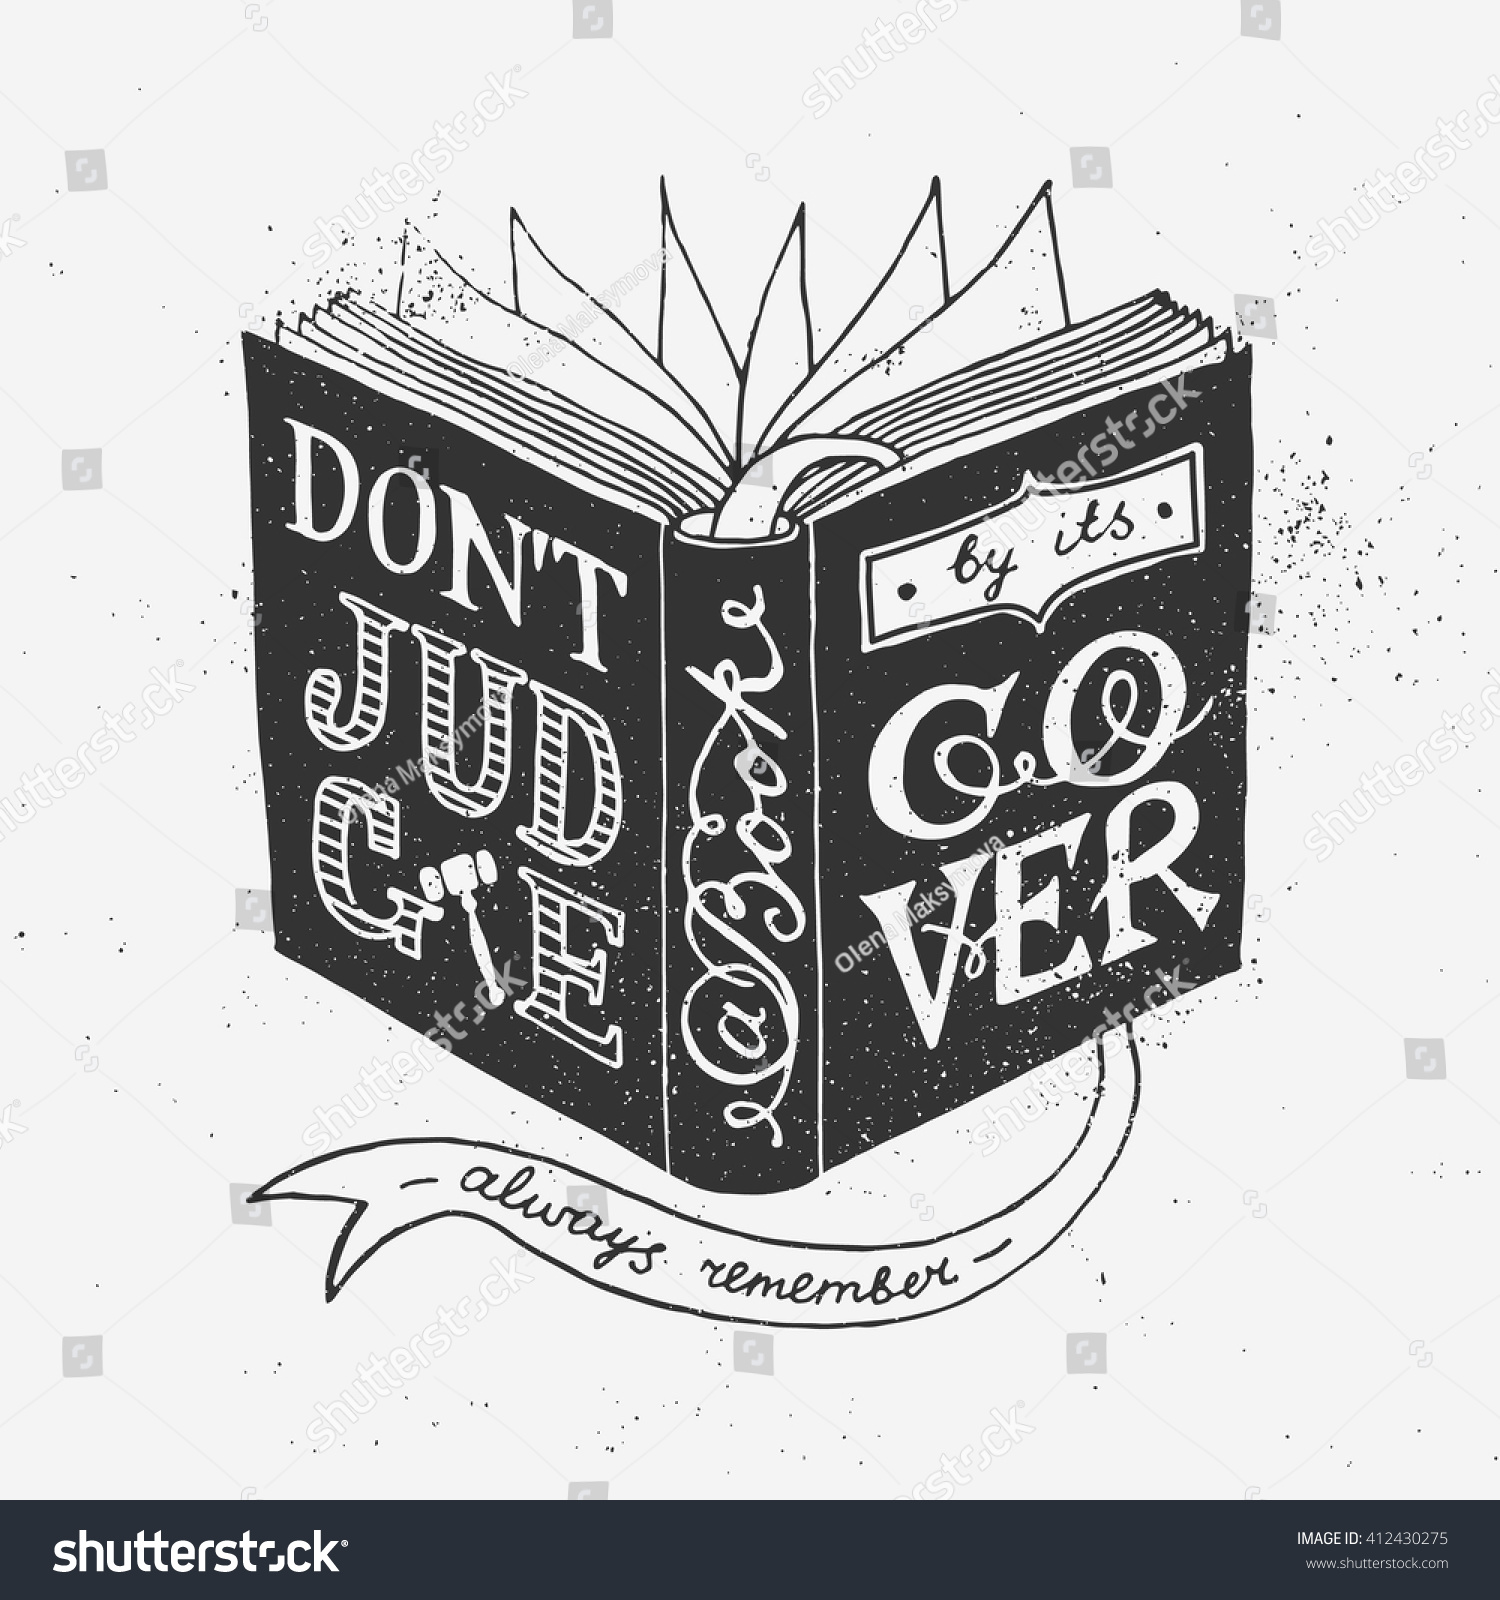 Dont Judge Book By Cover Quote Stock Vector Royalty Free